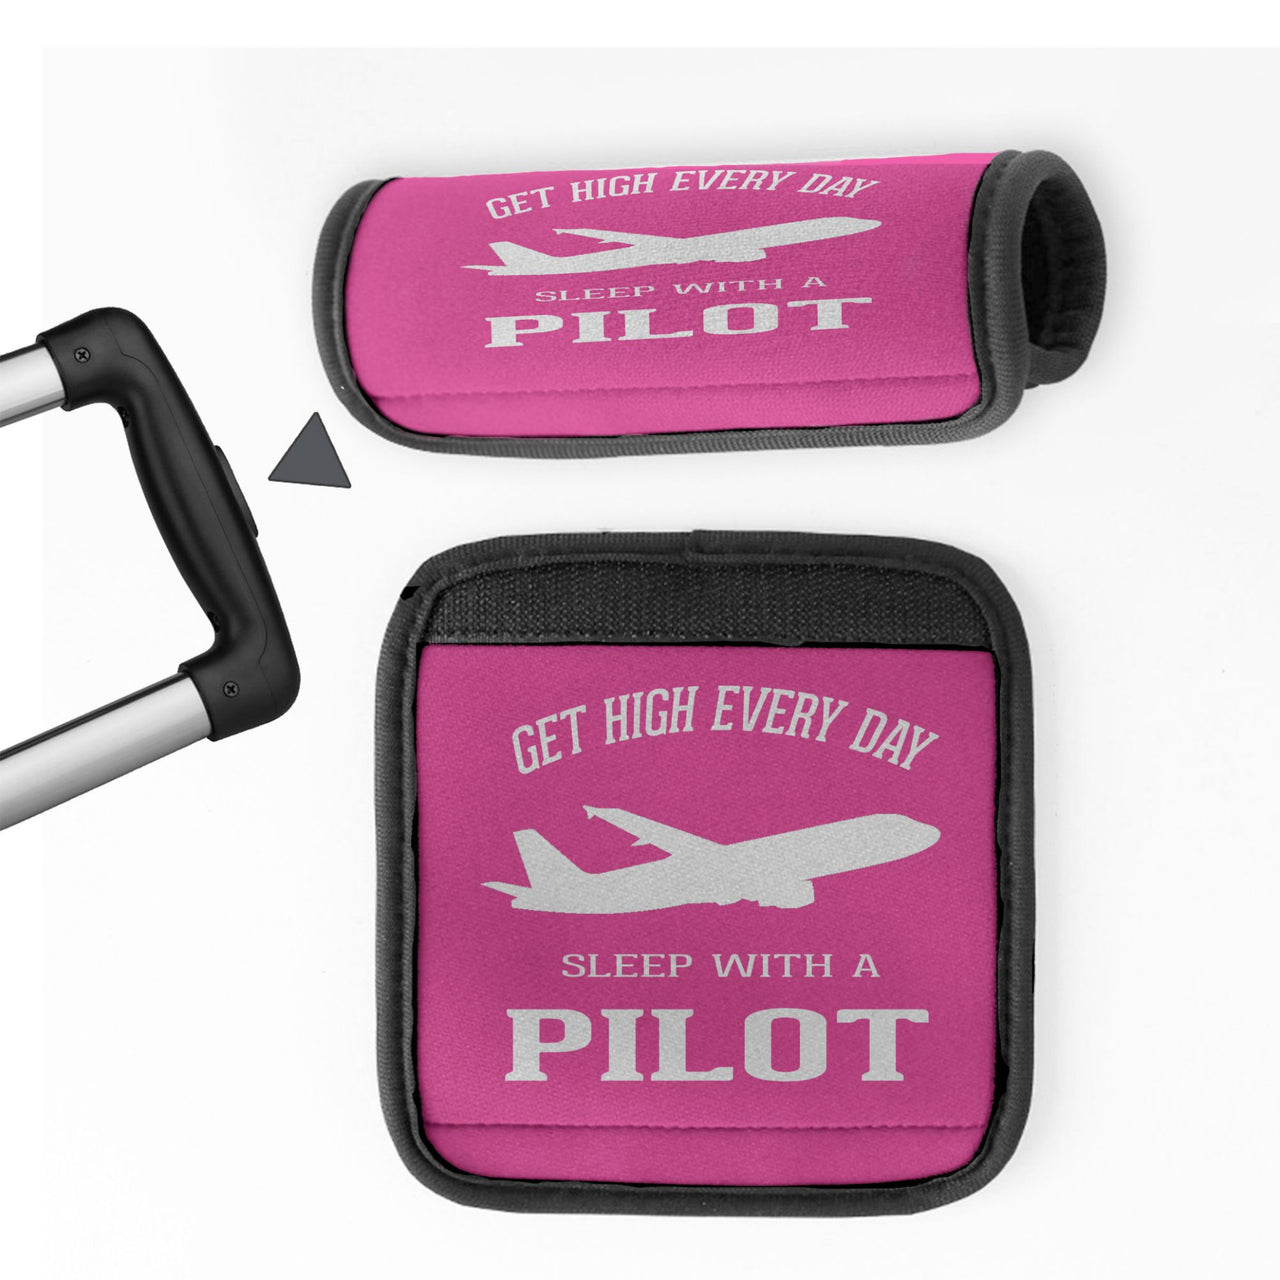 Get High Every Day Sleep With A Pilot Designed Neoprene Luggage Handle Covers